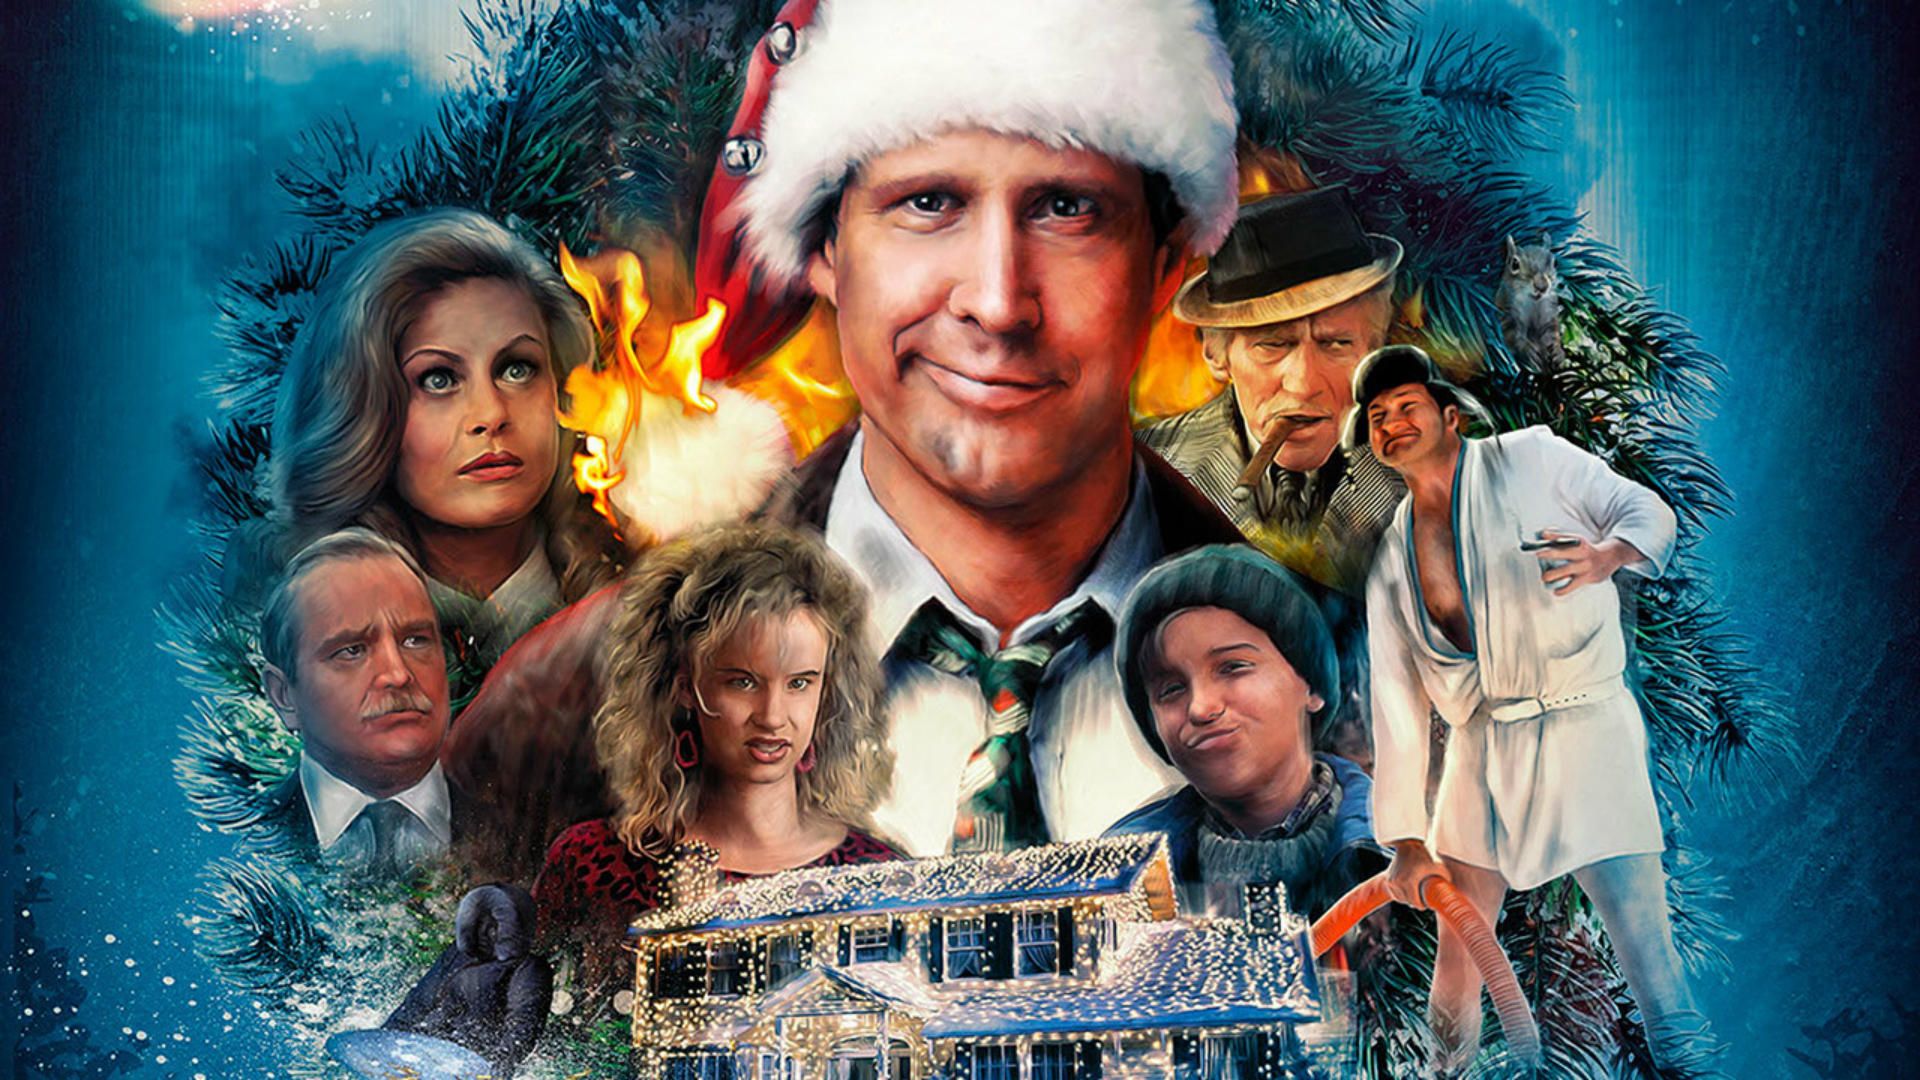 Christmas Vacation background